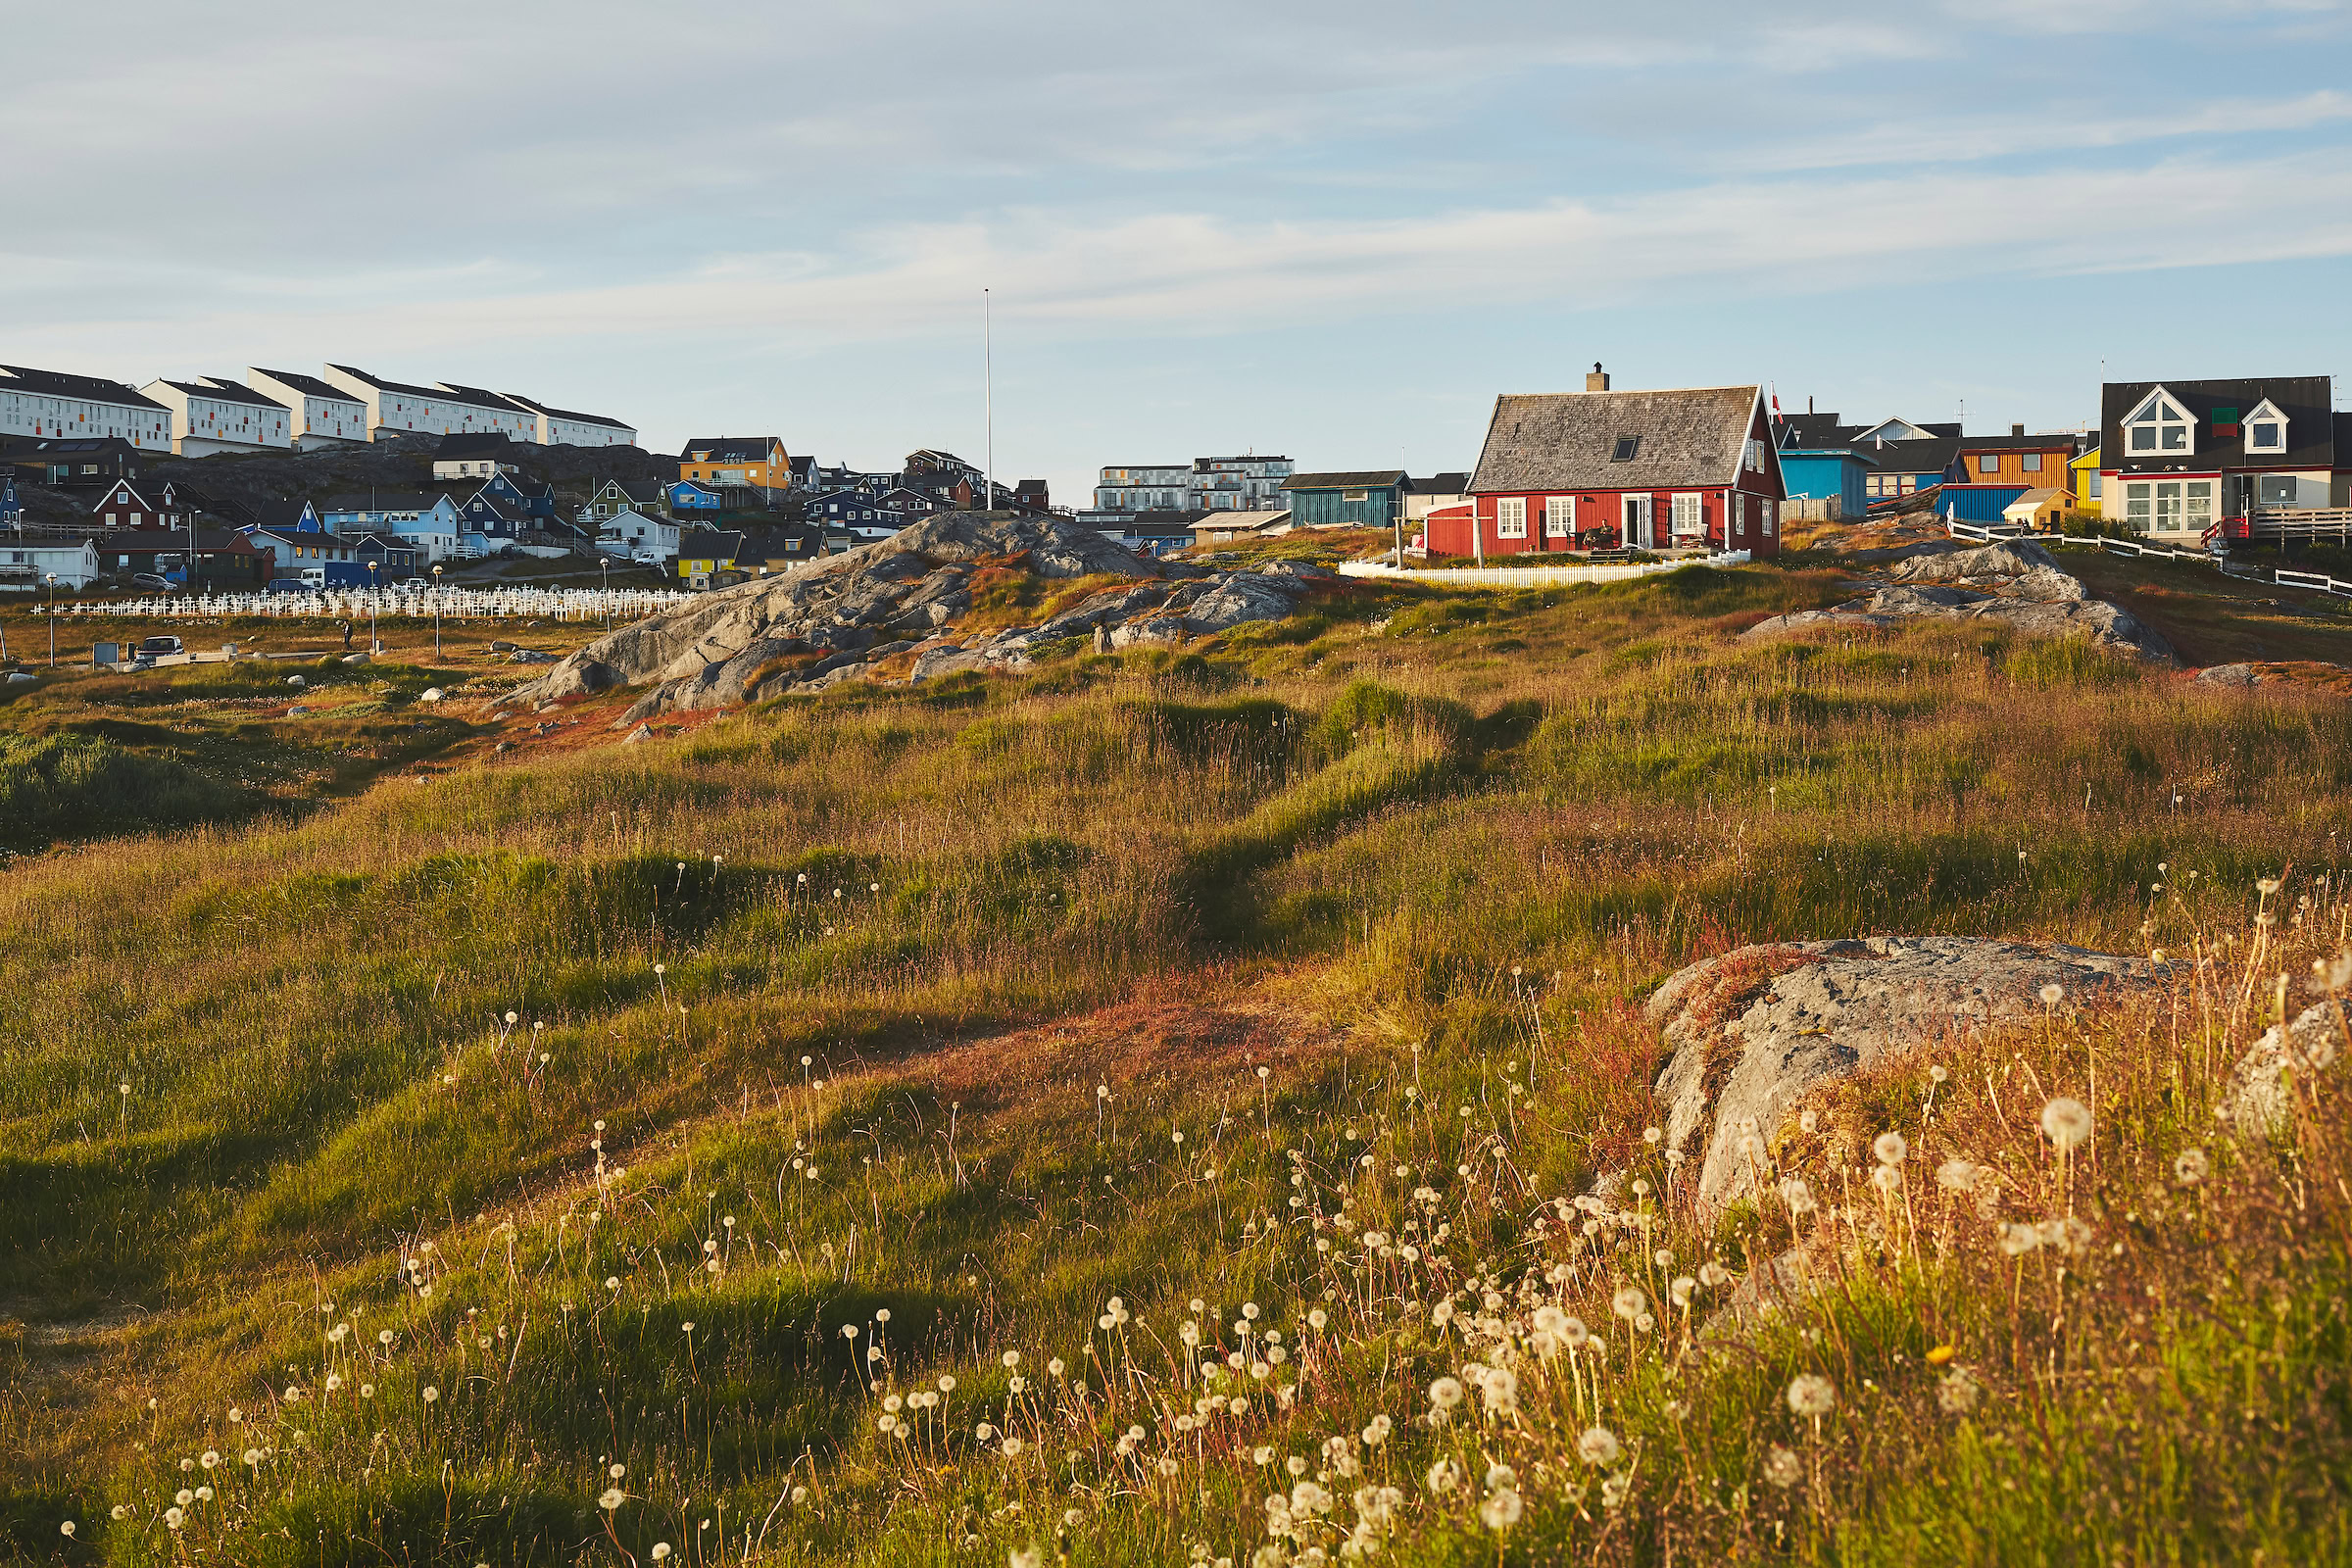 The Red House in Nuuk and its surrounding field. Photo by Peter Lindstrom - Visit Greenland